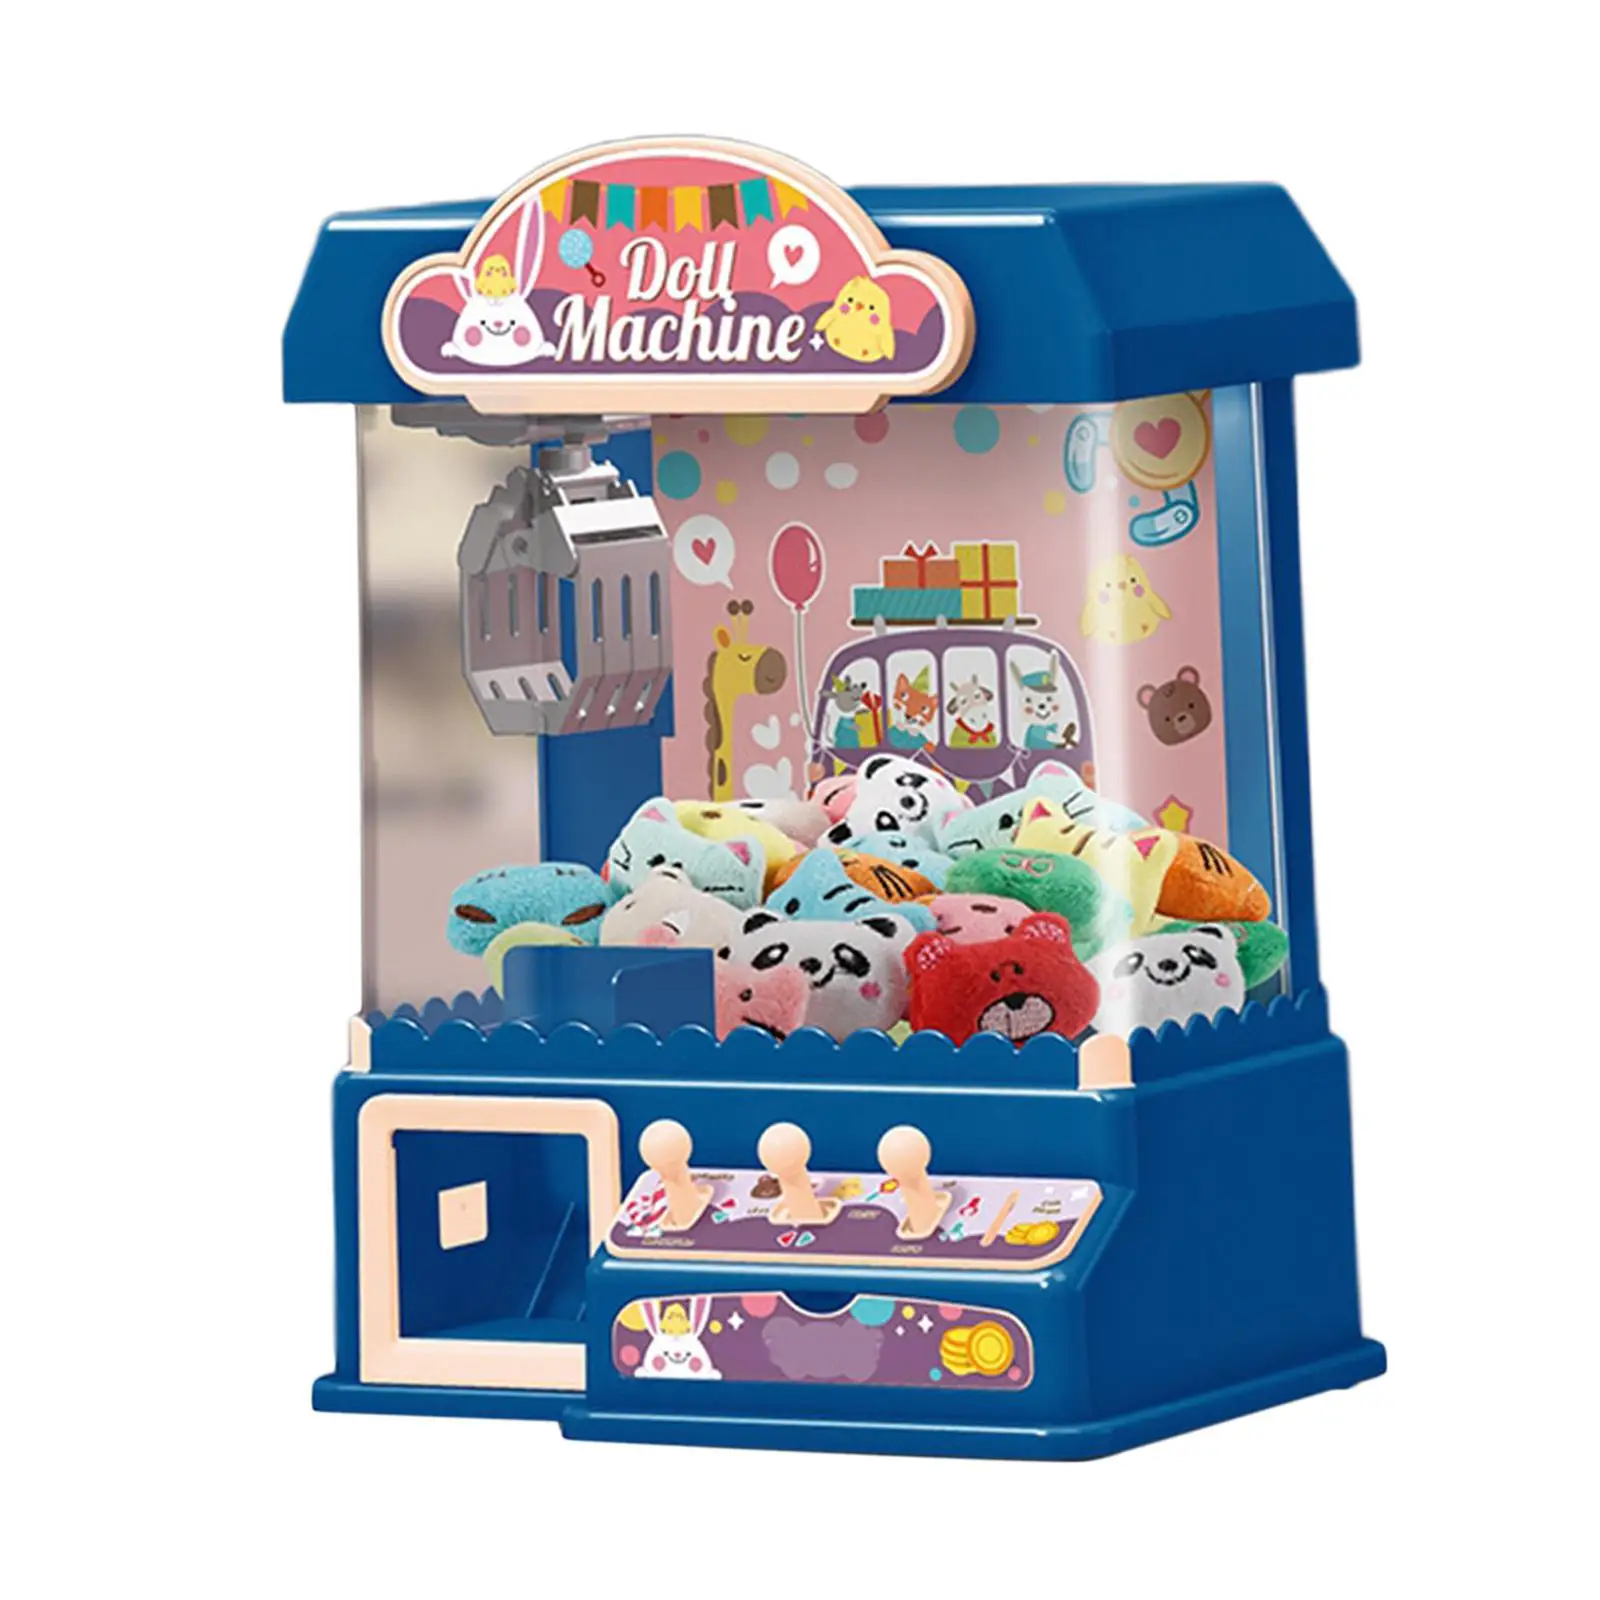 Claw Machine Manual Claw Cch Toy Practical for Outdoor Gift Indoor